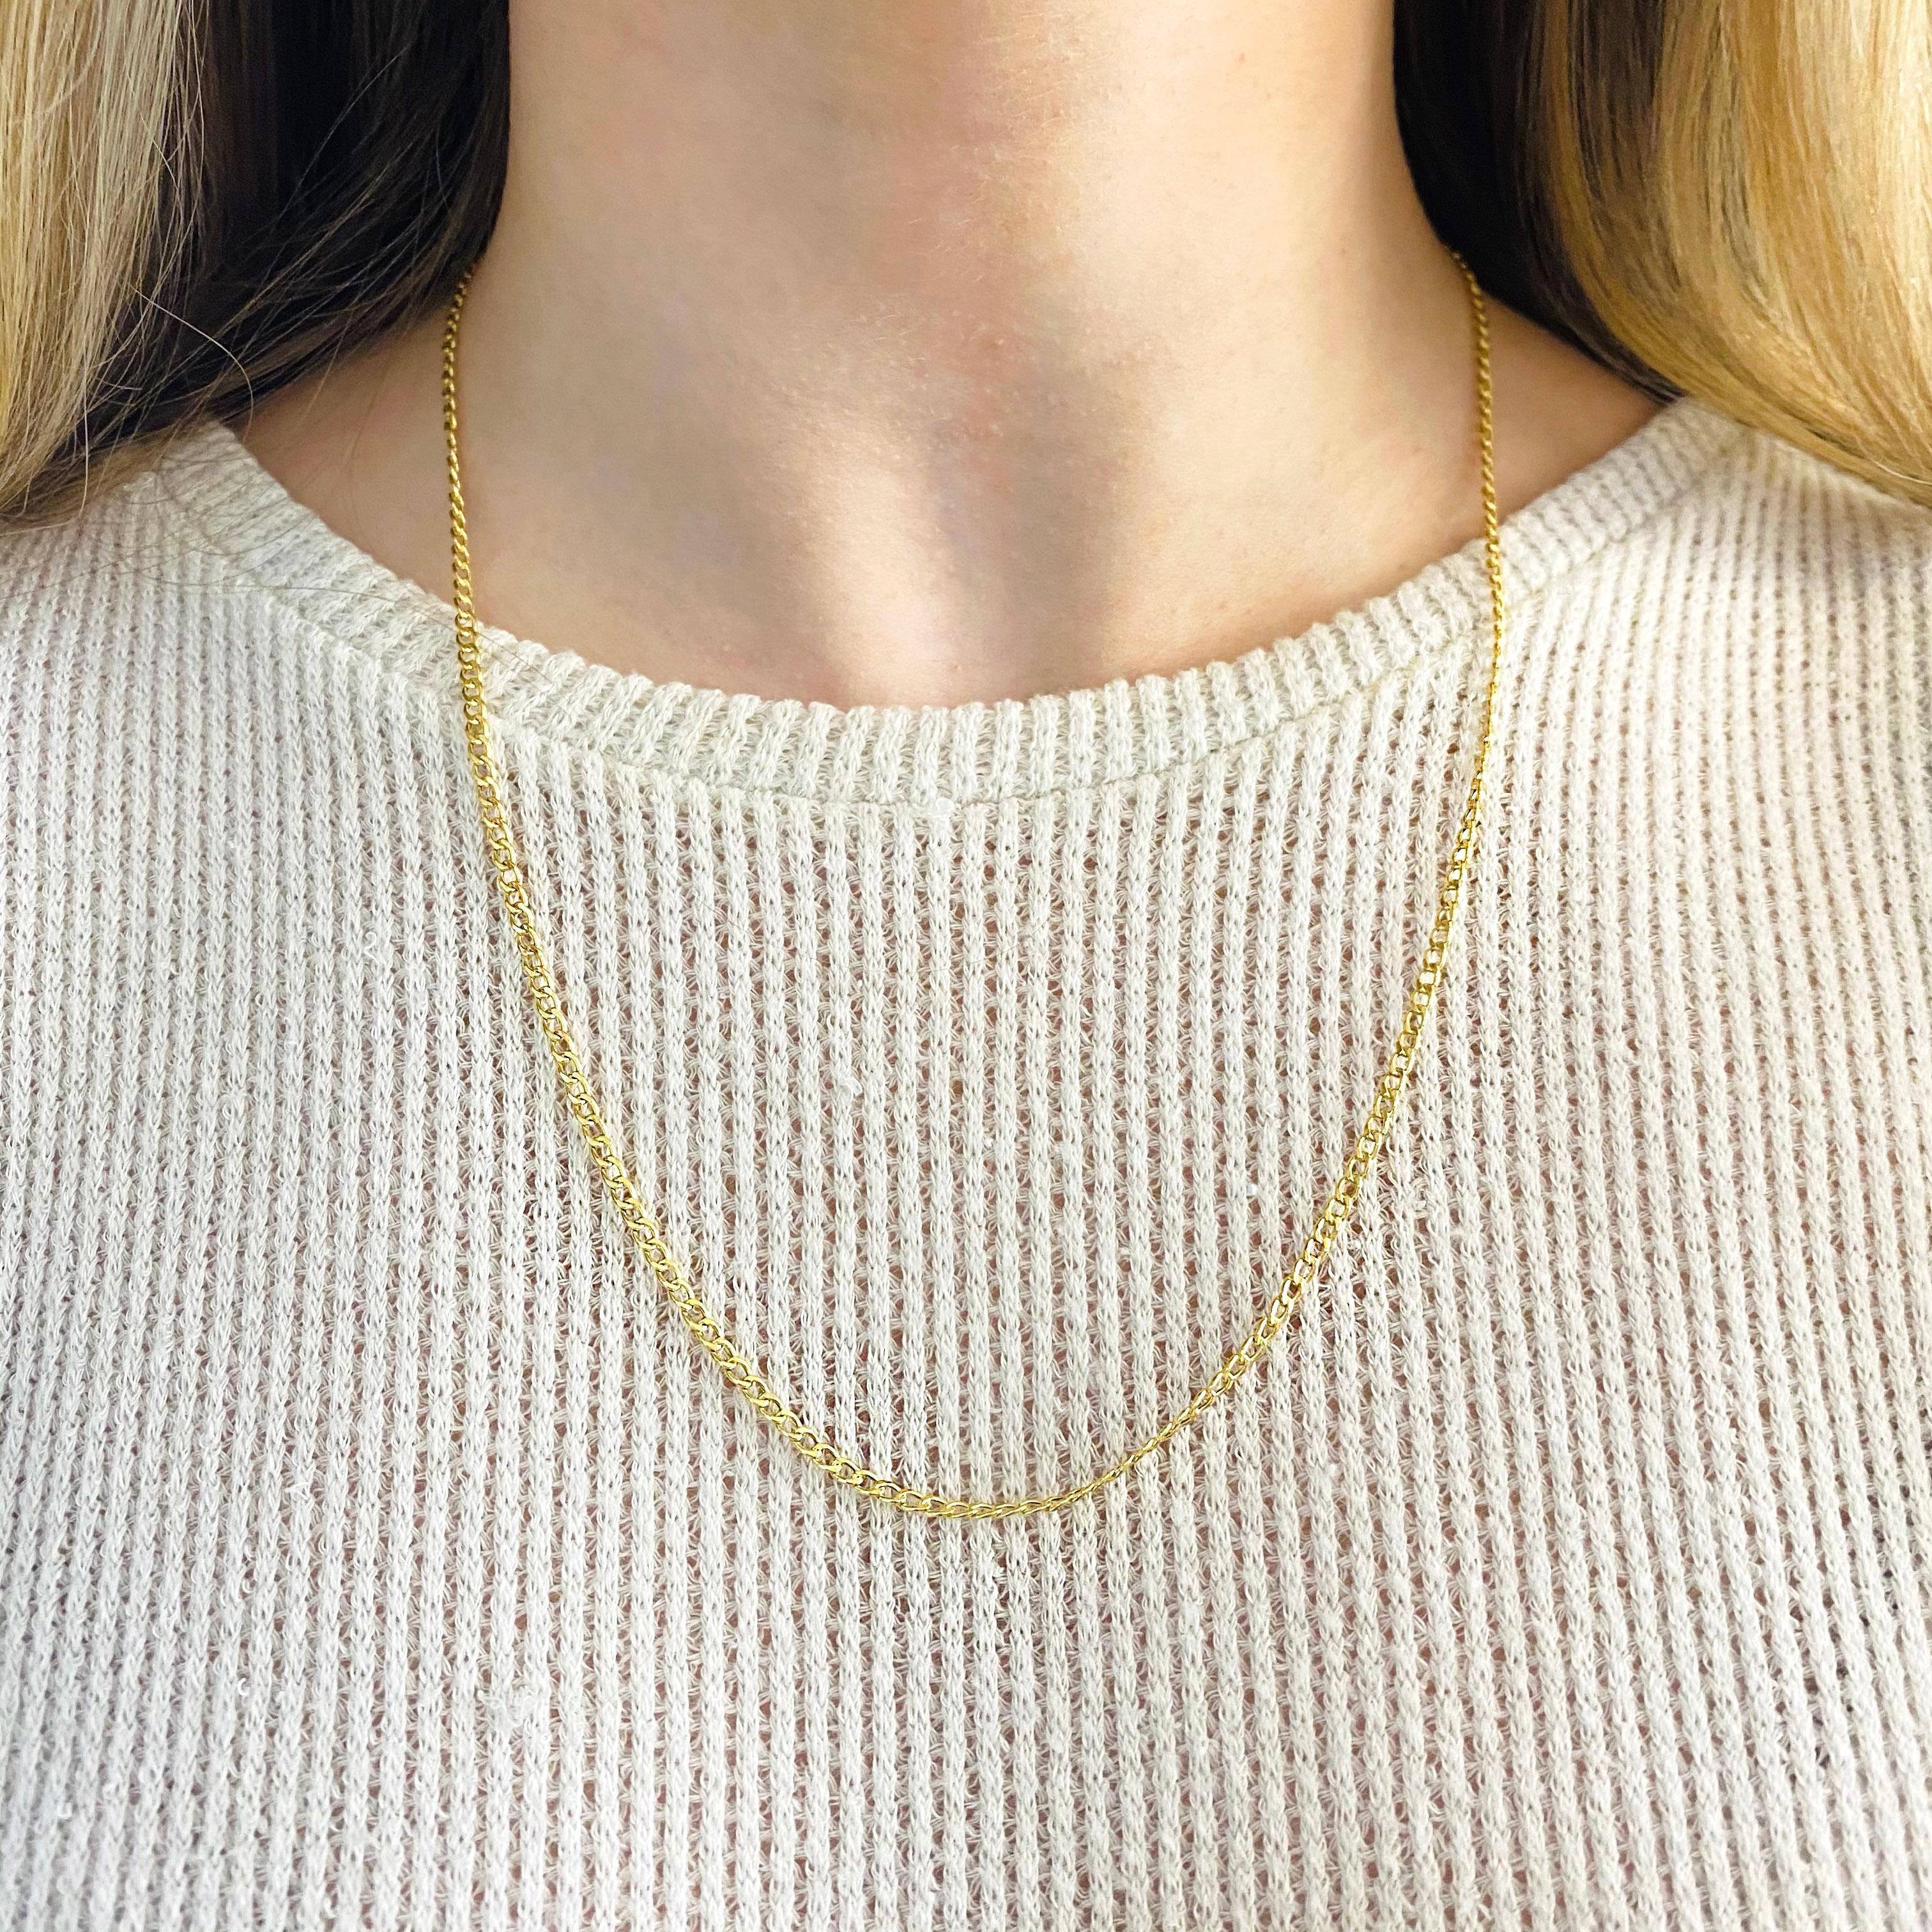 The details for this beautiful chain  are listed below:
Metal Quality: 14 Karat Yellow Gold
Chain Type: Cable
Chain Length: 22 inches
Clasp: Lobster
Chain Diameter: 2.85 millimeters
